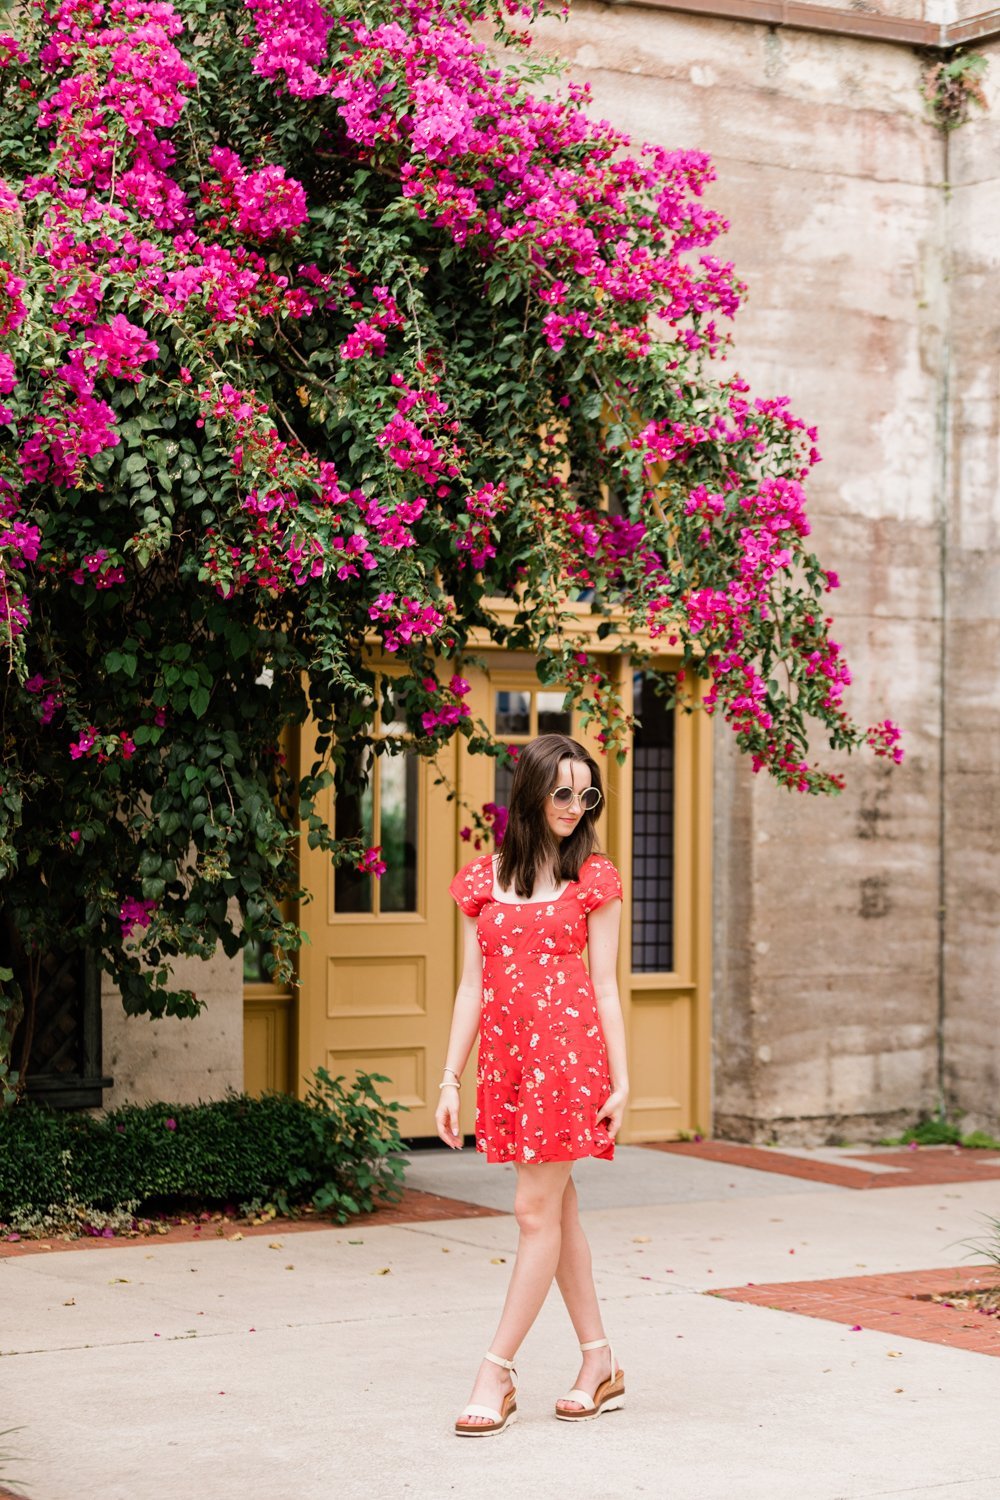 Spring and floral themed senior picture ideas in St. Augustine FL